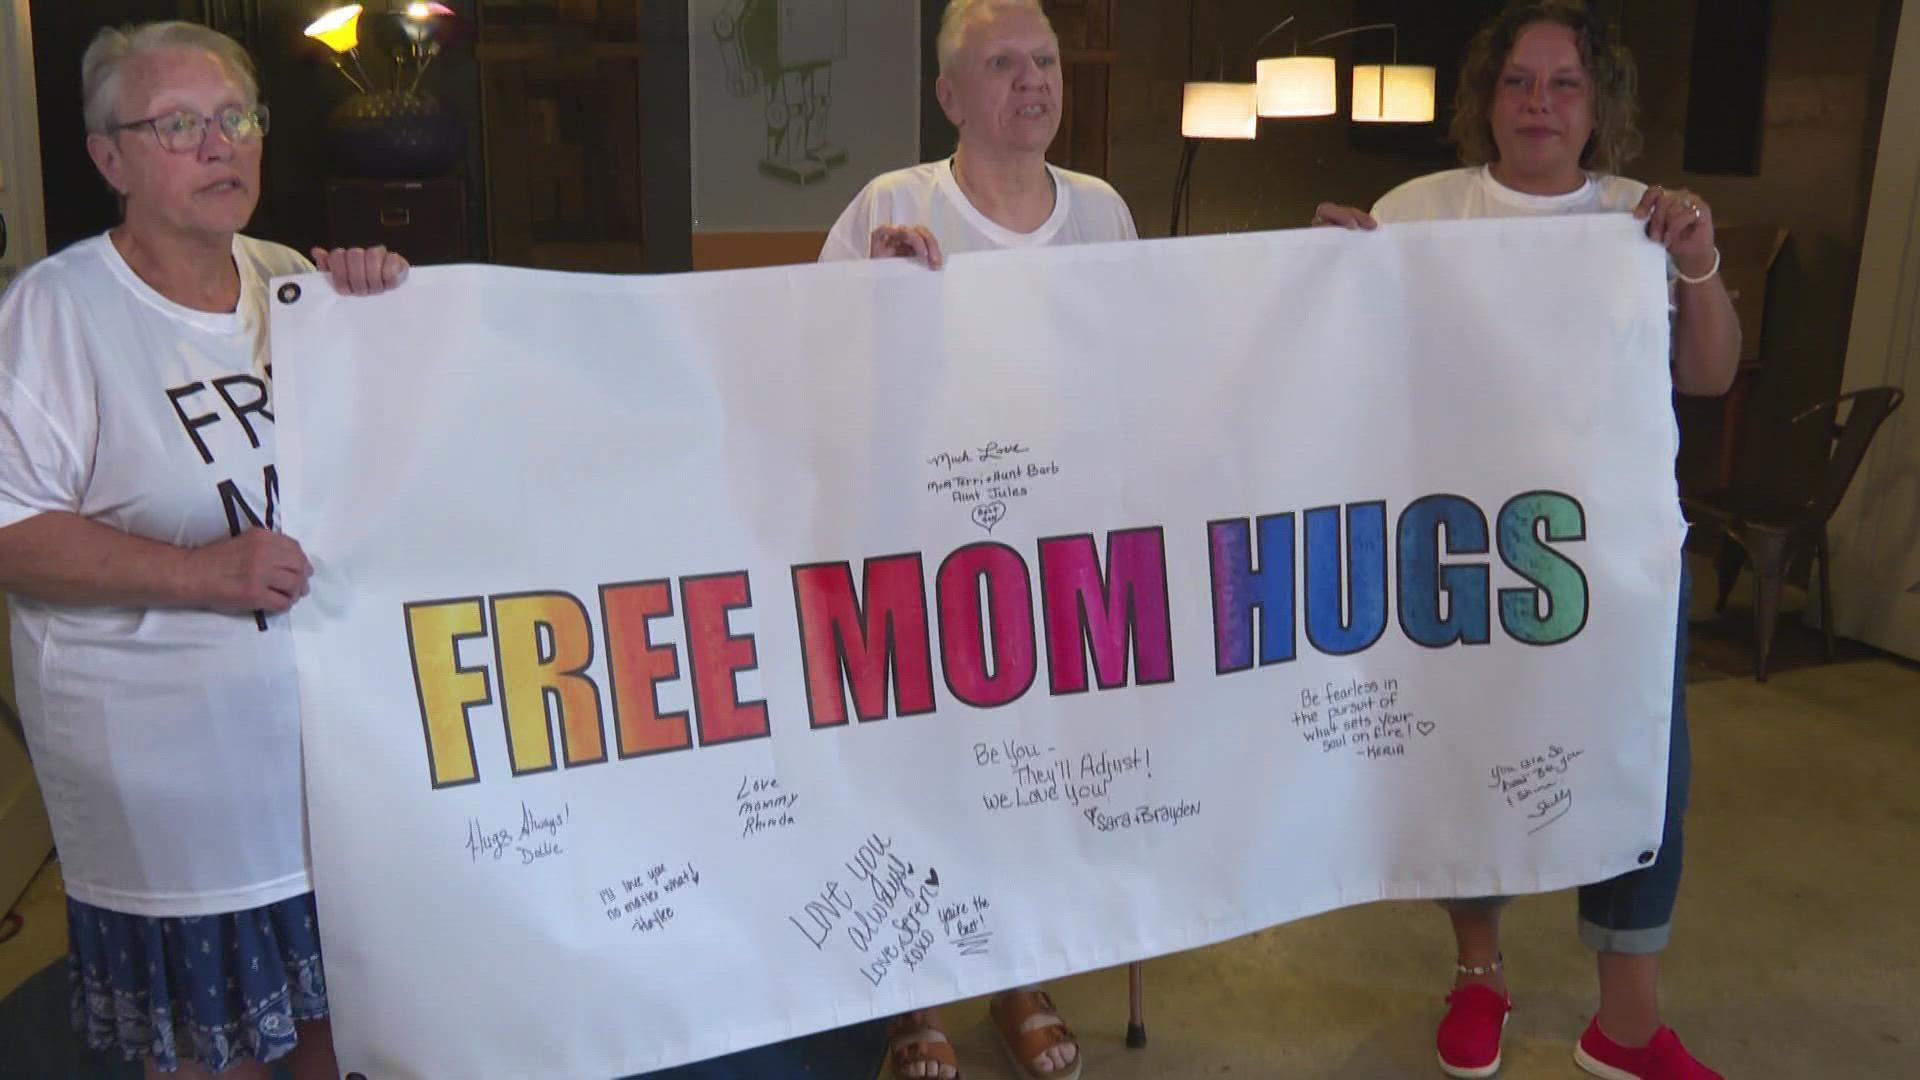 Moms in Muskegon are building up the community one free mom hug at a time.